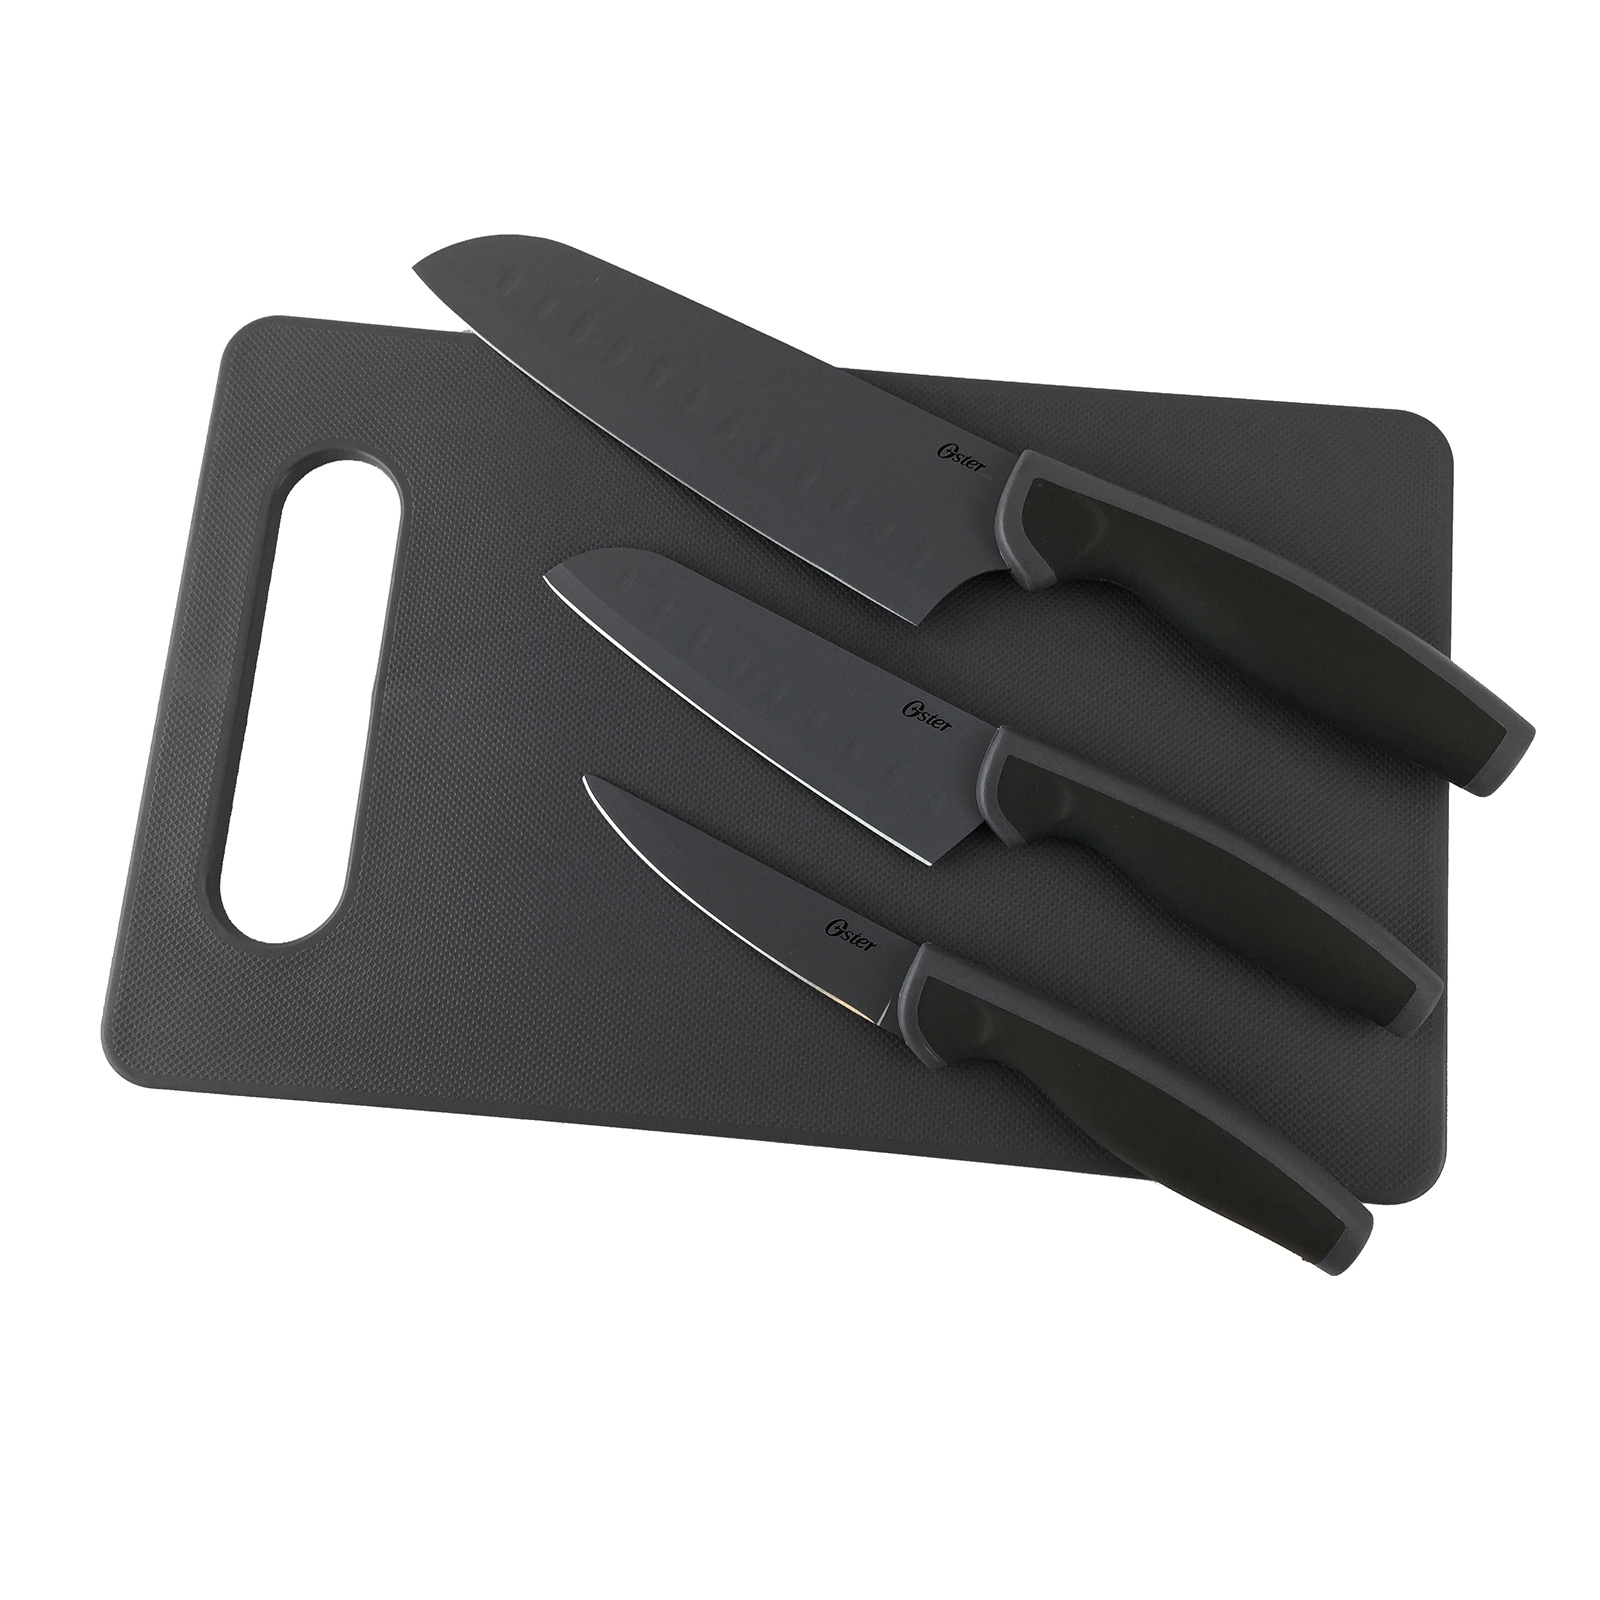 https://ak1.ostkcdn.com/images/products/is/images/direct/004a6446ebfec0b49a1c1064e5da57174a3e5a05/Oster-Slice-Craft-4-Piece-Cutlery-Knife-Set-with-Cutting-Board-in-Black.jpg